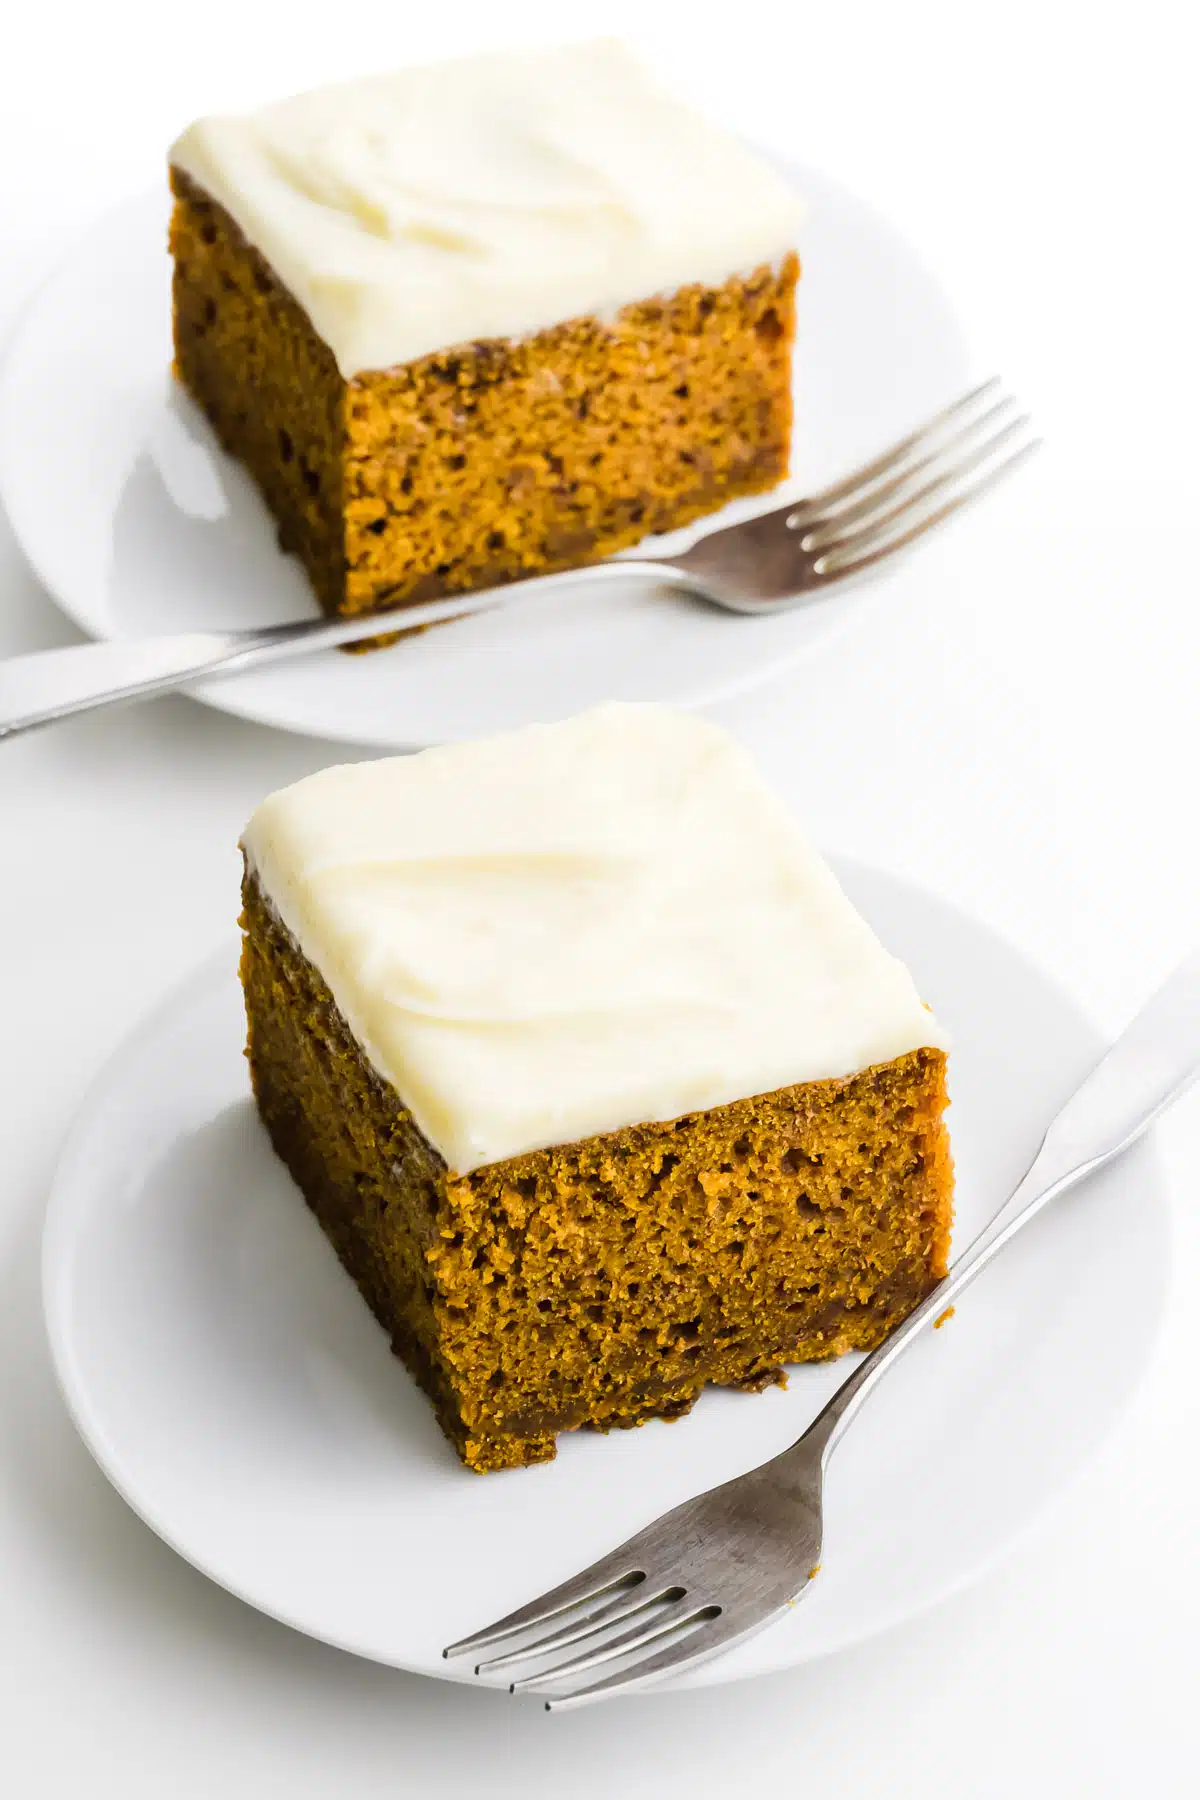 Two slices of pumpkin spice cake are on plates with forks beside them.